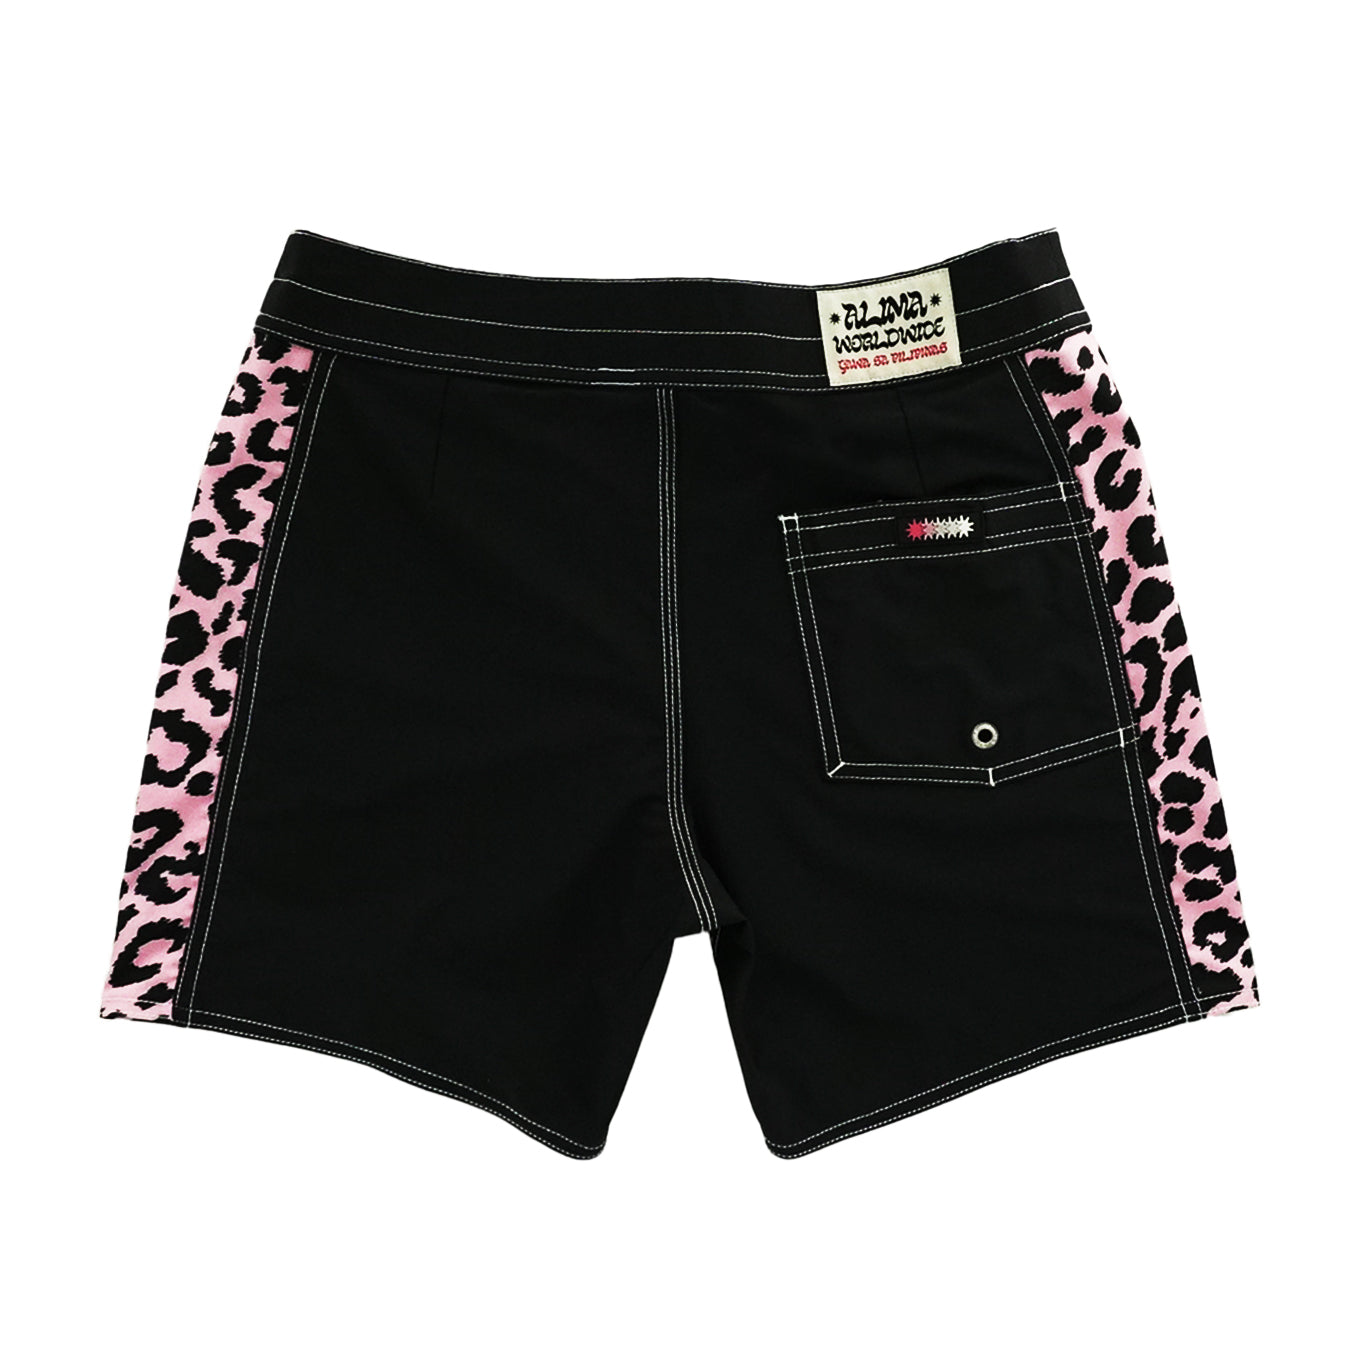 Retro Snap in Black with Pink Leopard Panels Boardshorts